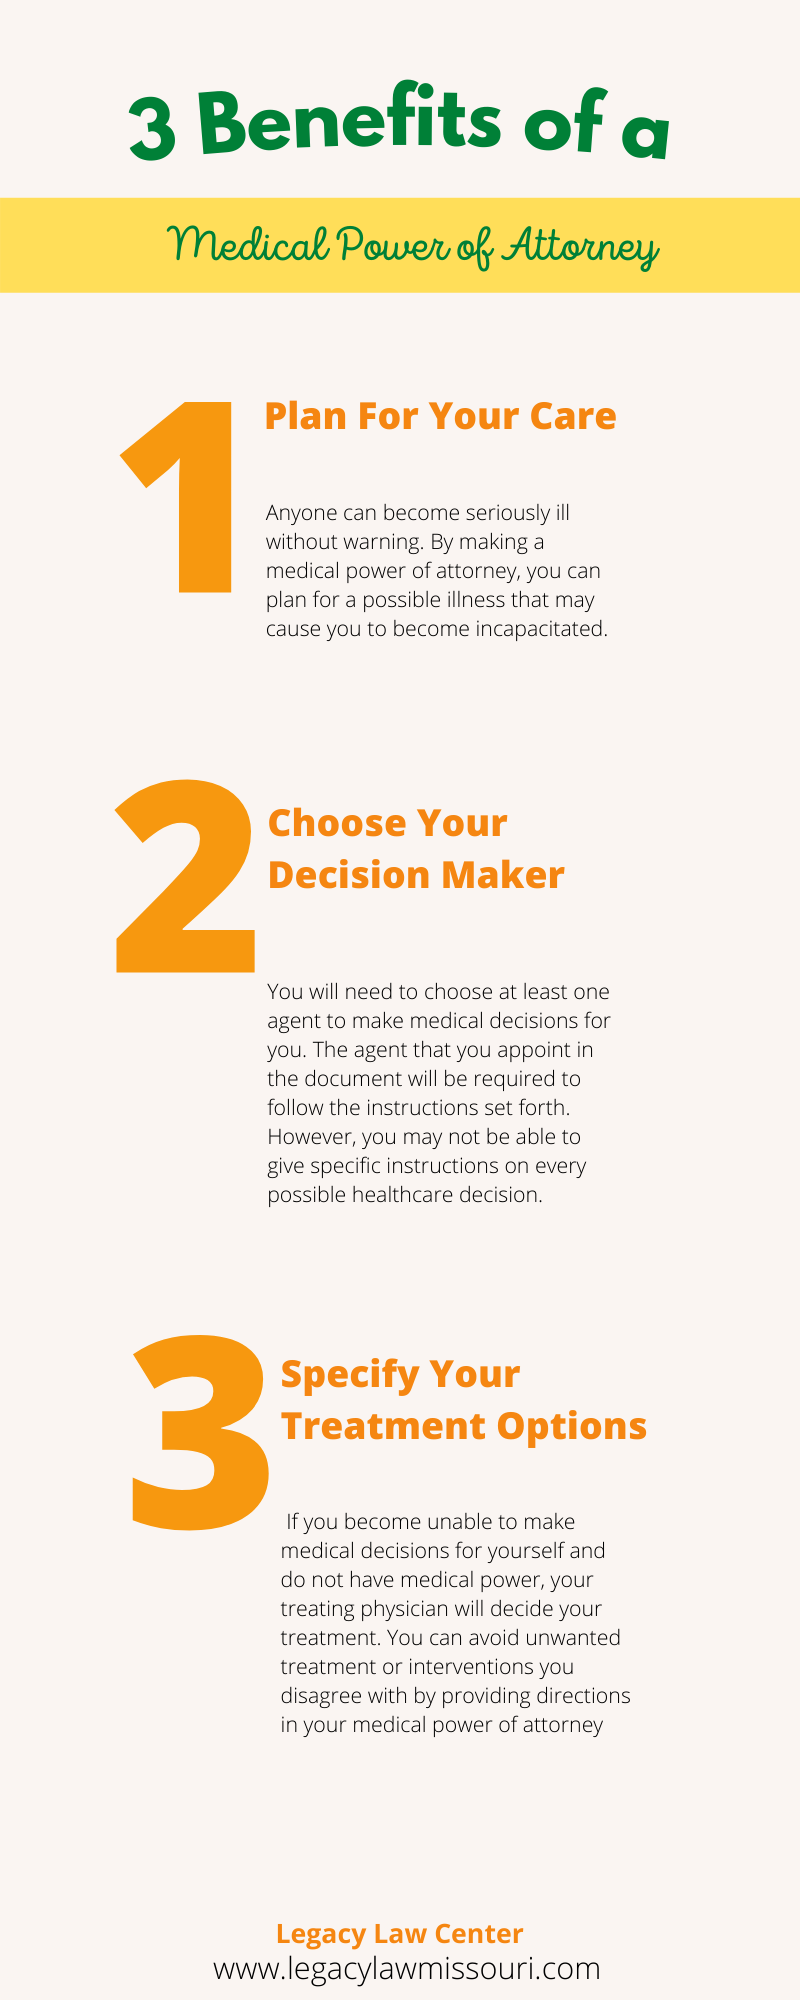 3 Benefits of a Medical Power of Attorney Infographic